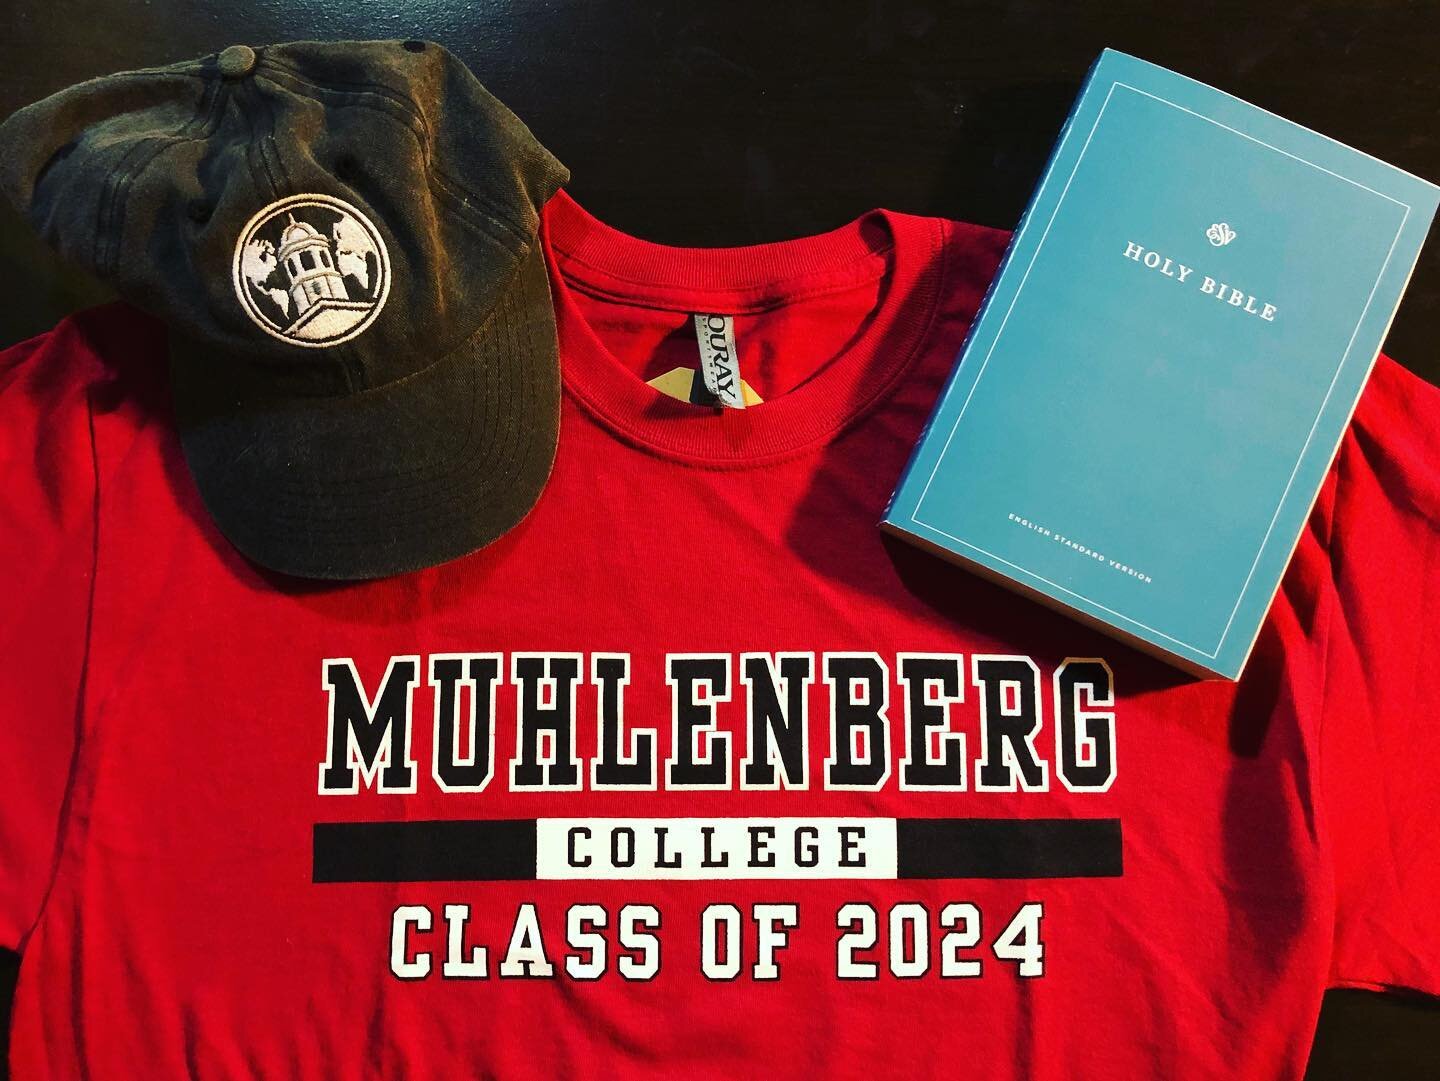 ***GIVEAWAY***
We&rsquo;d love to get to know you and help you to connect with other students even before the semester begins...so we are doing a giveaway!

Giveaway closes Friday (8/14/2020)

Here&rsquo;s how to enter:
1. Follow @dcfmuhlenberg
2. Ta